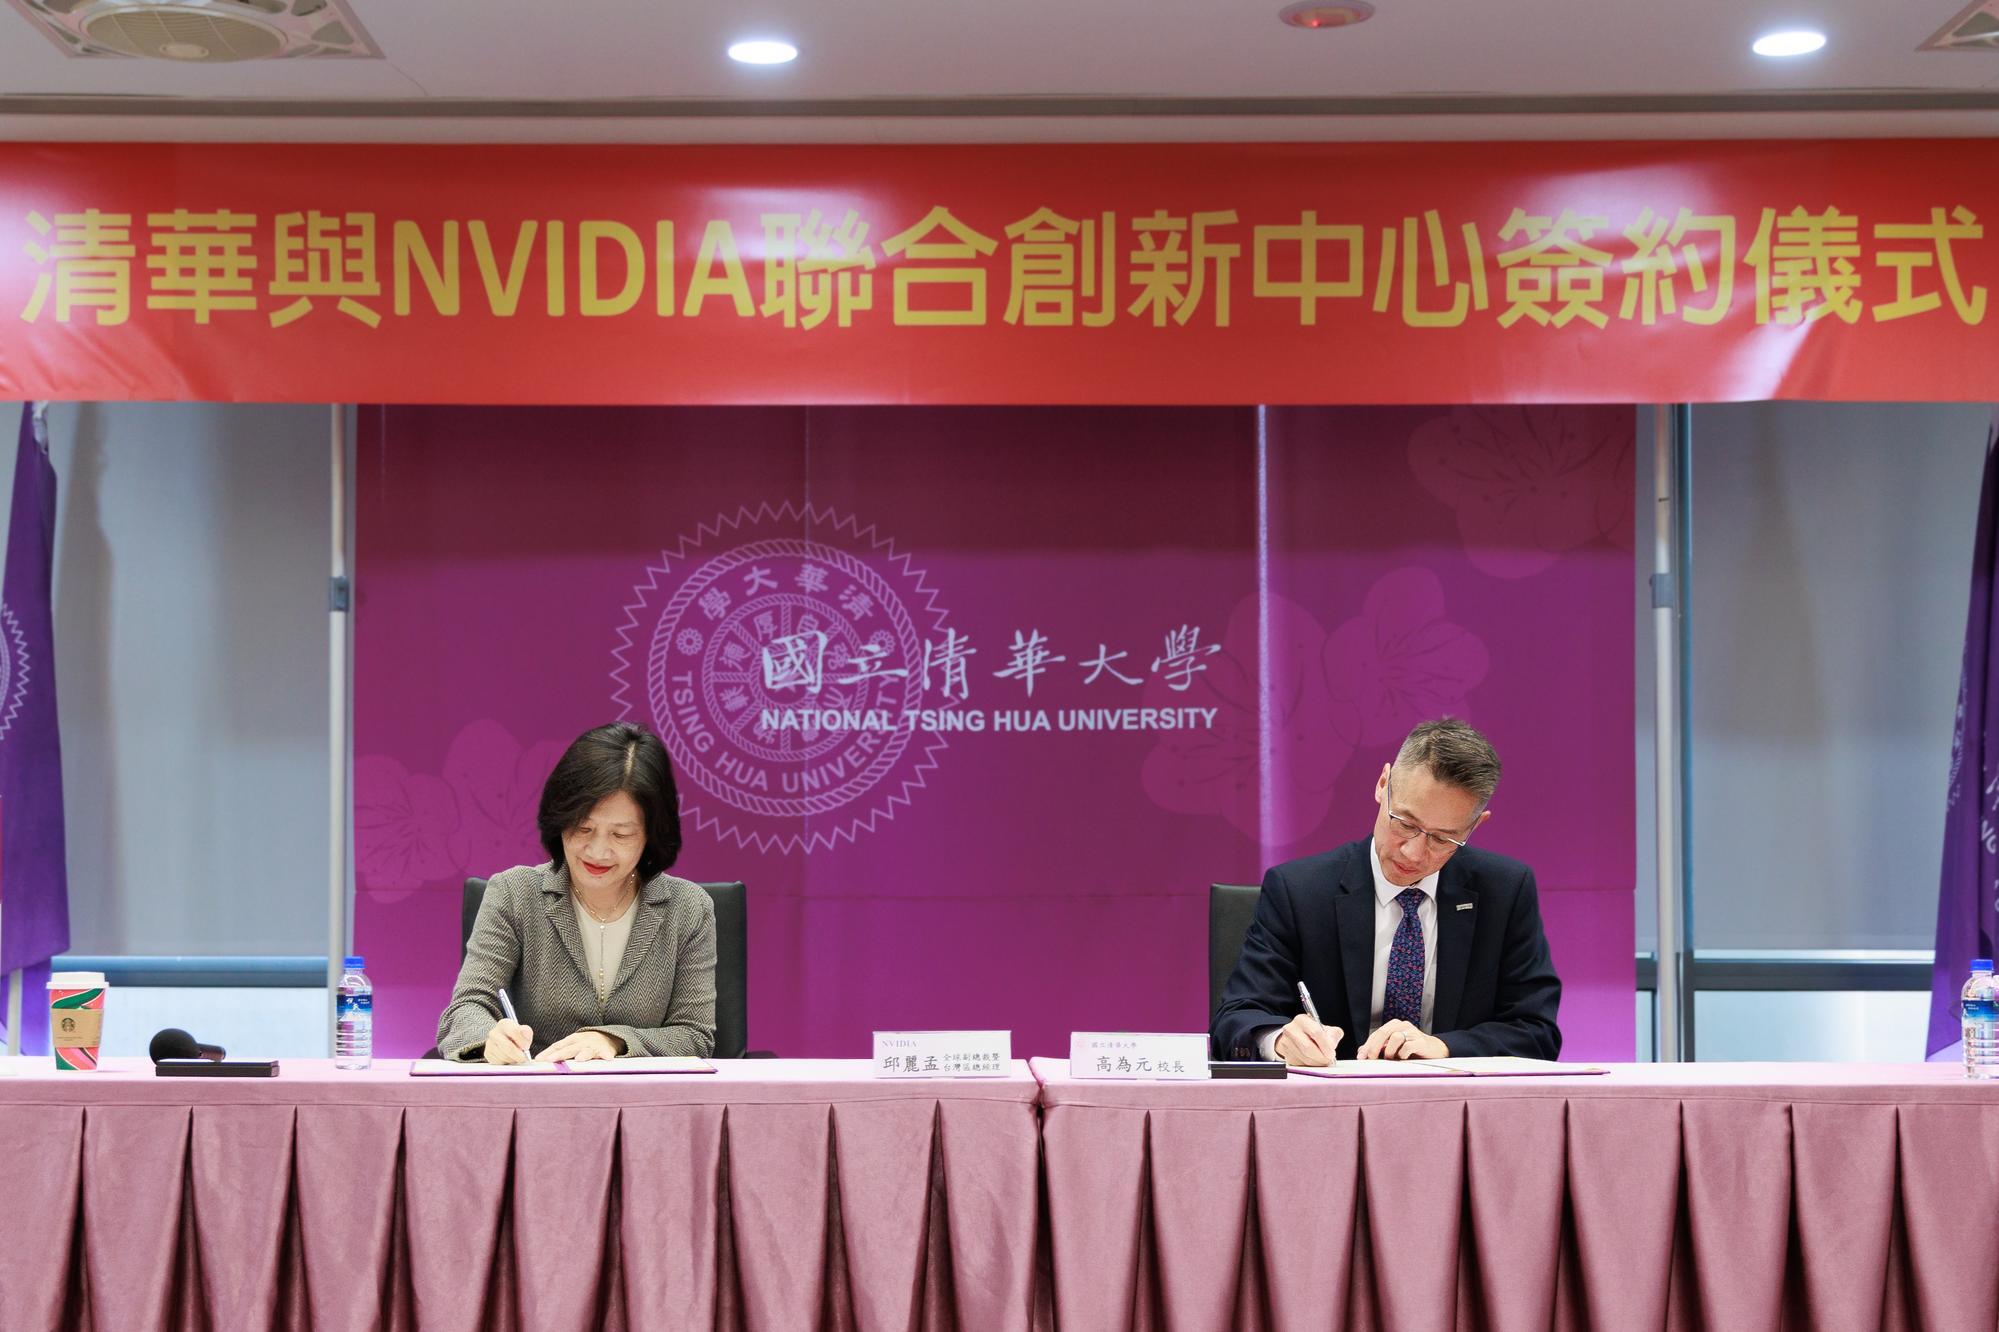 The signing ceremony for the establishment of the Innovation Center. President W. John Kao (高為元) (right) and Eunice Chiu (邱麗孟), NVIDIA Vice President and General Manager Taiwan, sign the agreement on the collaboration.